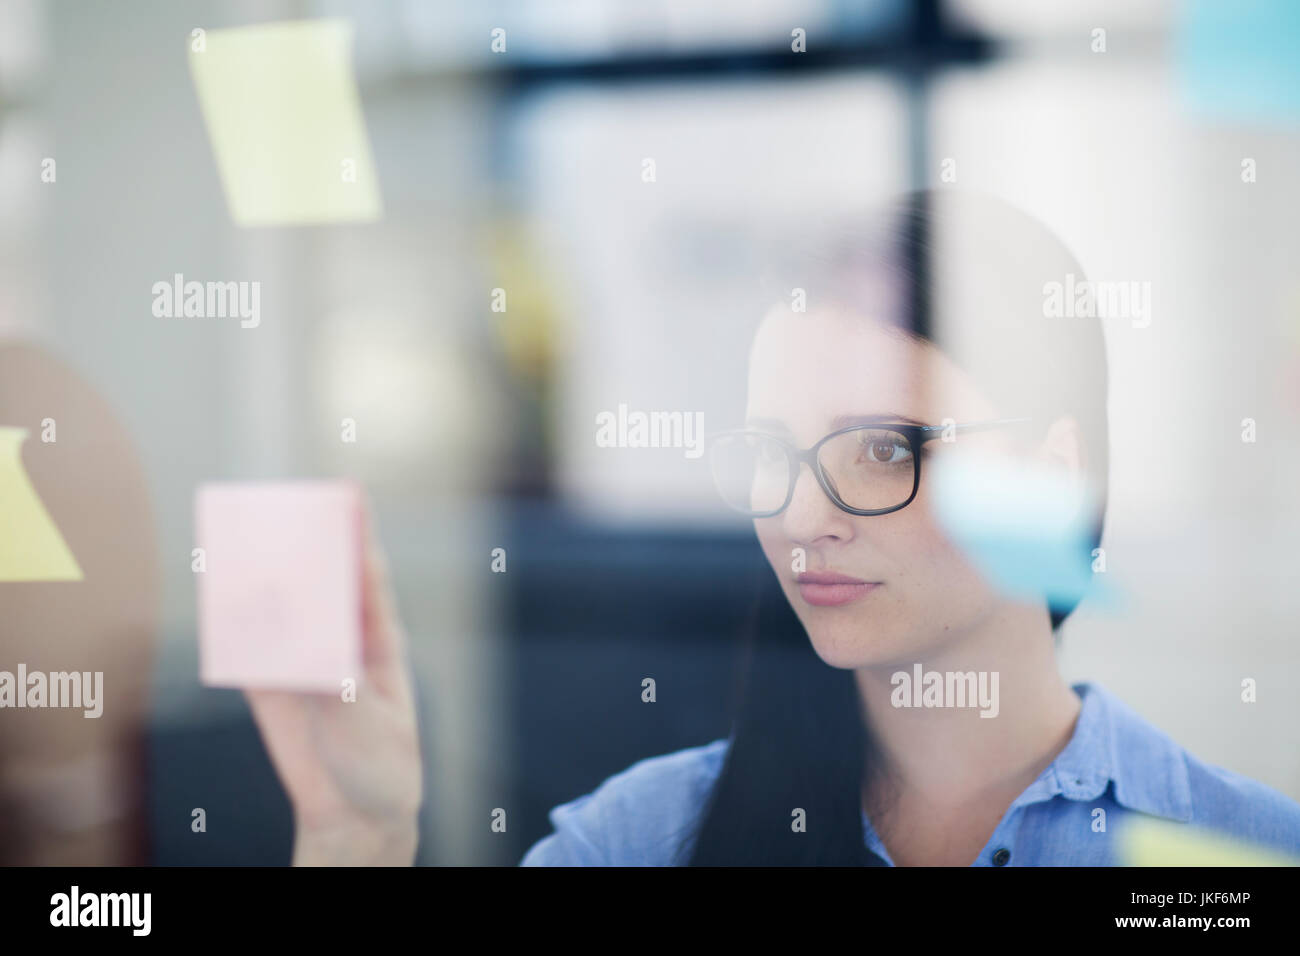 Female employee placing sticky notes on glass Stock Photo